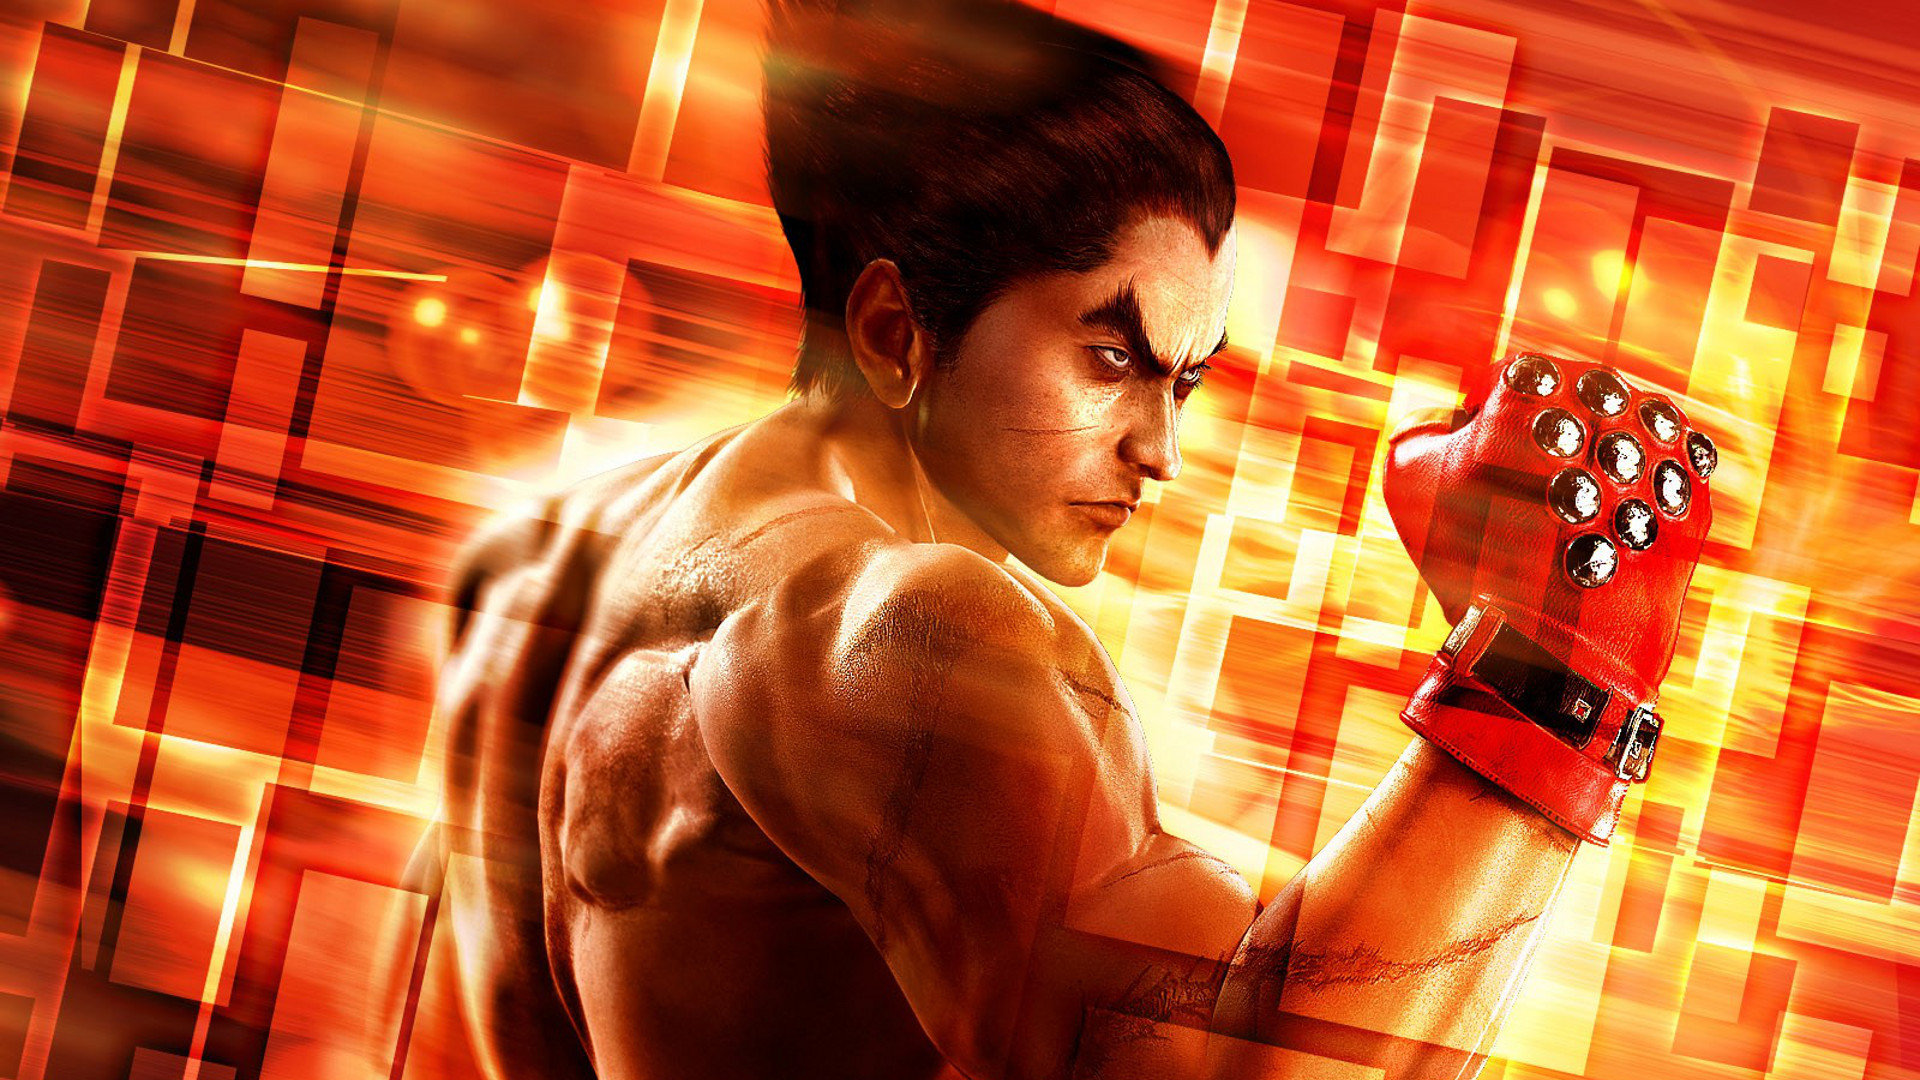 Awesome Tekken 5 free wallpaper ID:232301 for full hd 1920x1080 computer